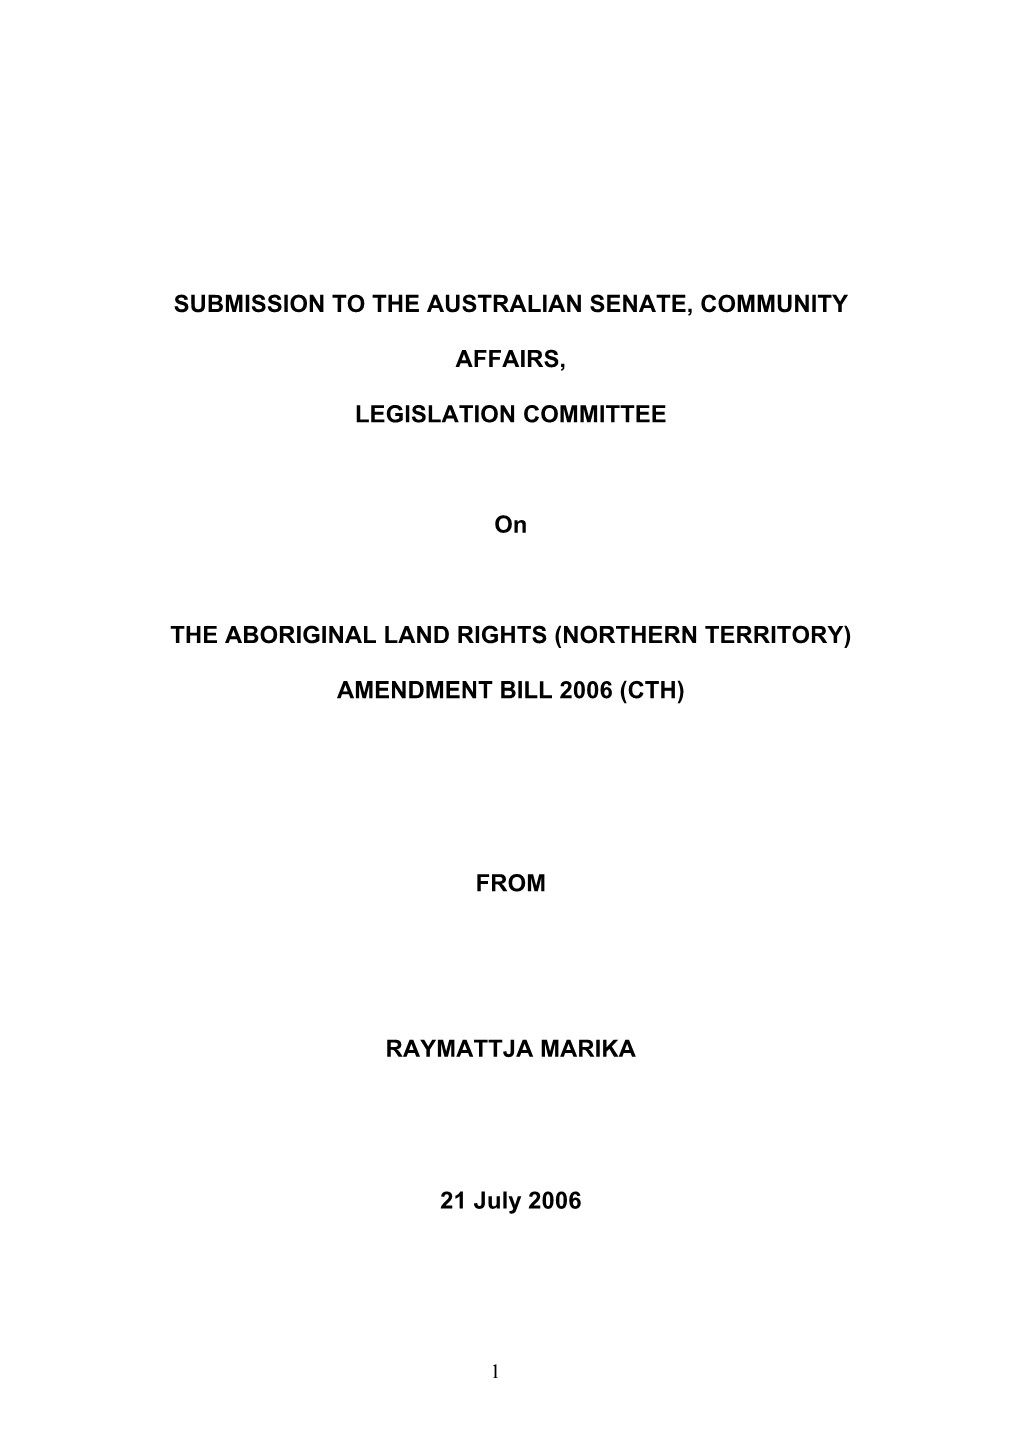 SUBMISSION to the AUSTRALIAN SENATE, COMMUNITY AFFAIRS, LEGISLATION COMMITTEE on the ABORIGINAL LAND RIGHTS (NORTHERN TERRITORY)